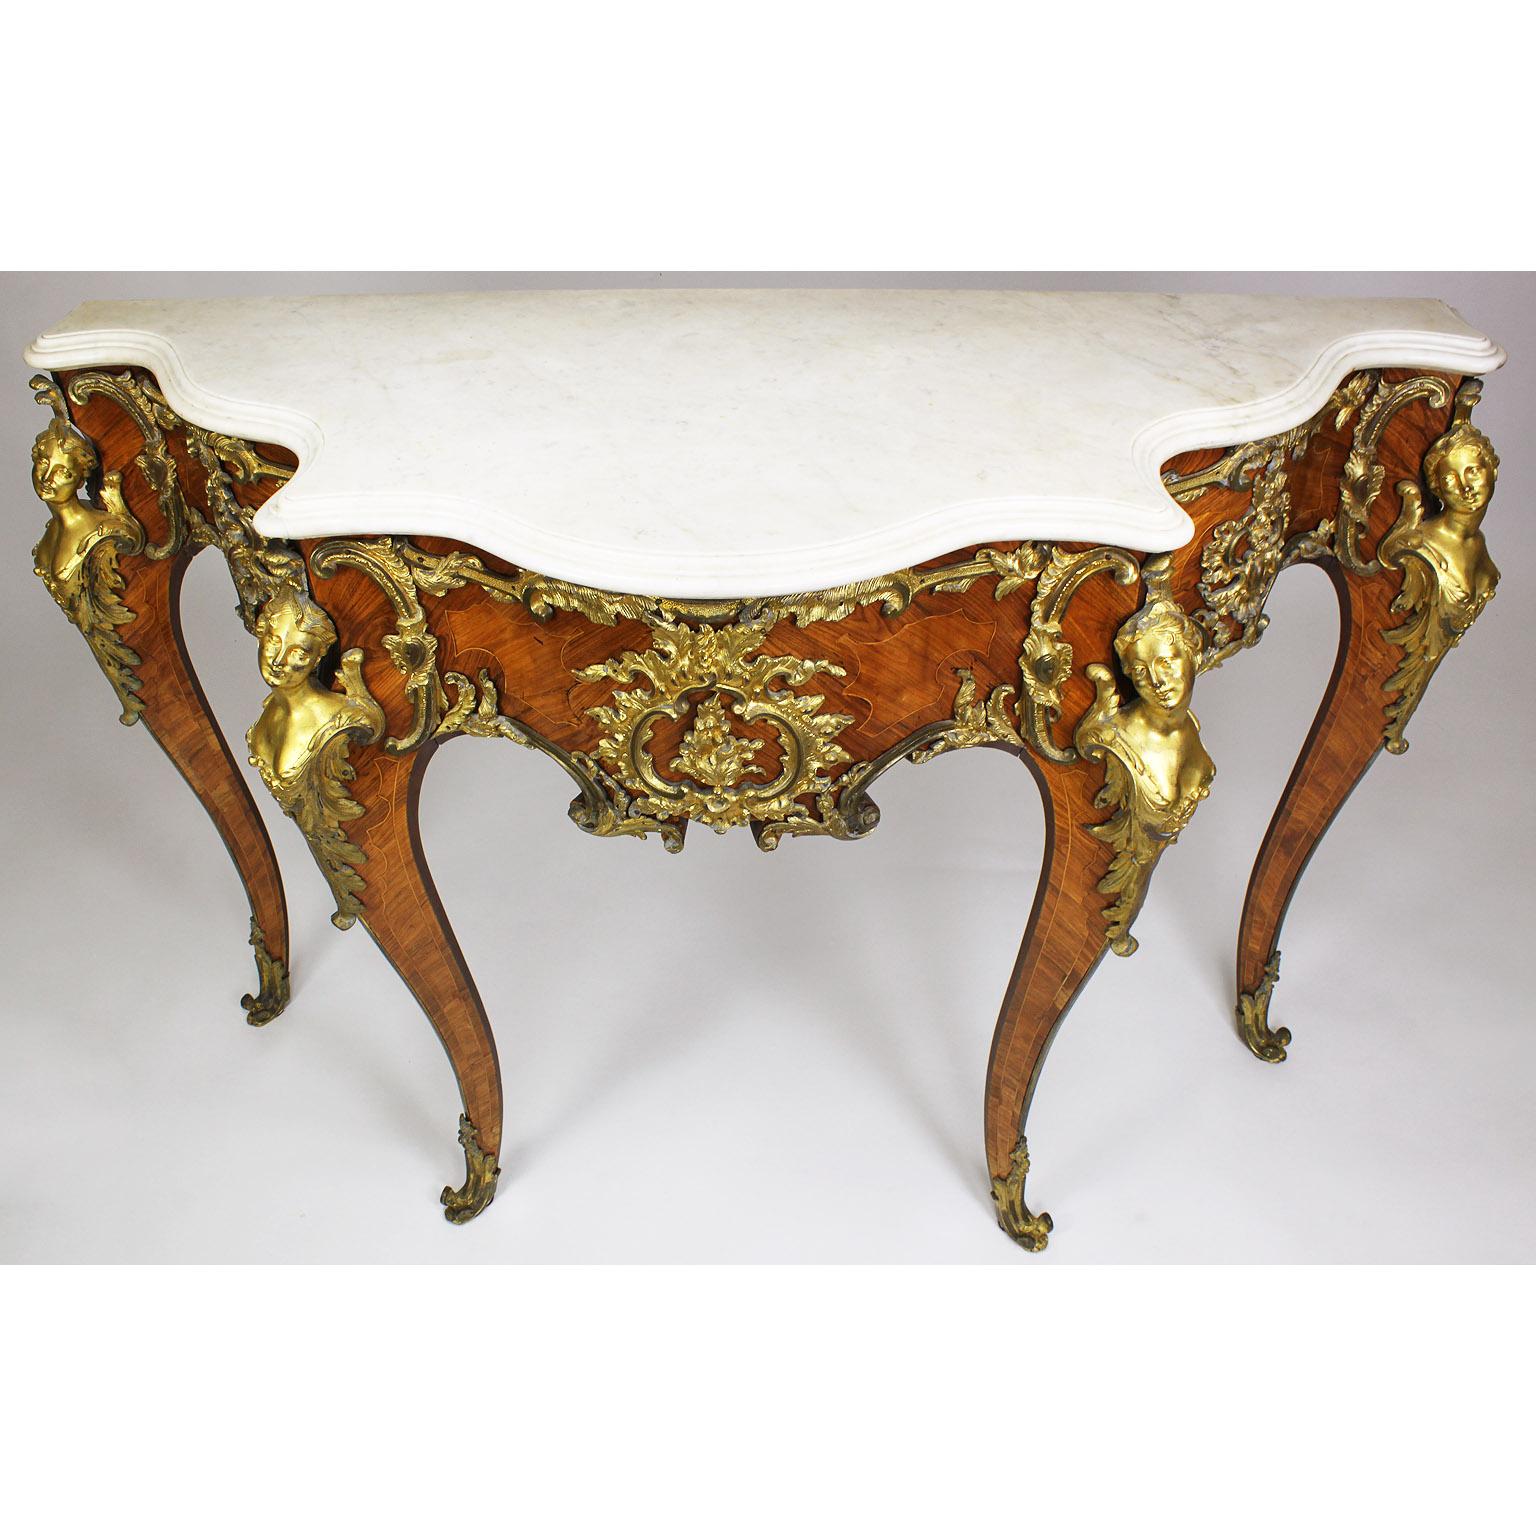 French 19th Century Louis XV Style Ormolu-Mounted Console After Charles Cressent For Sale 3